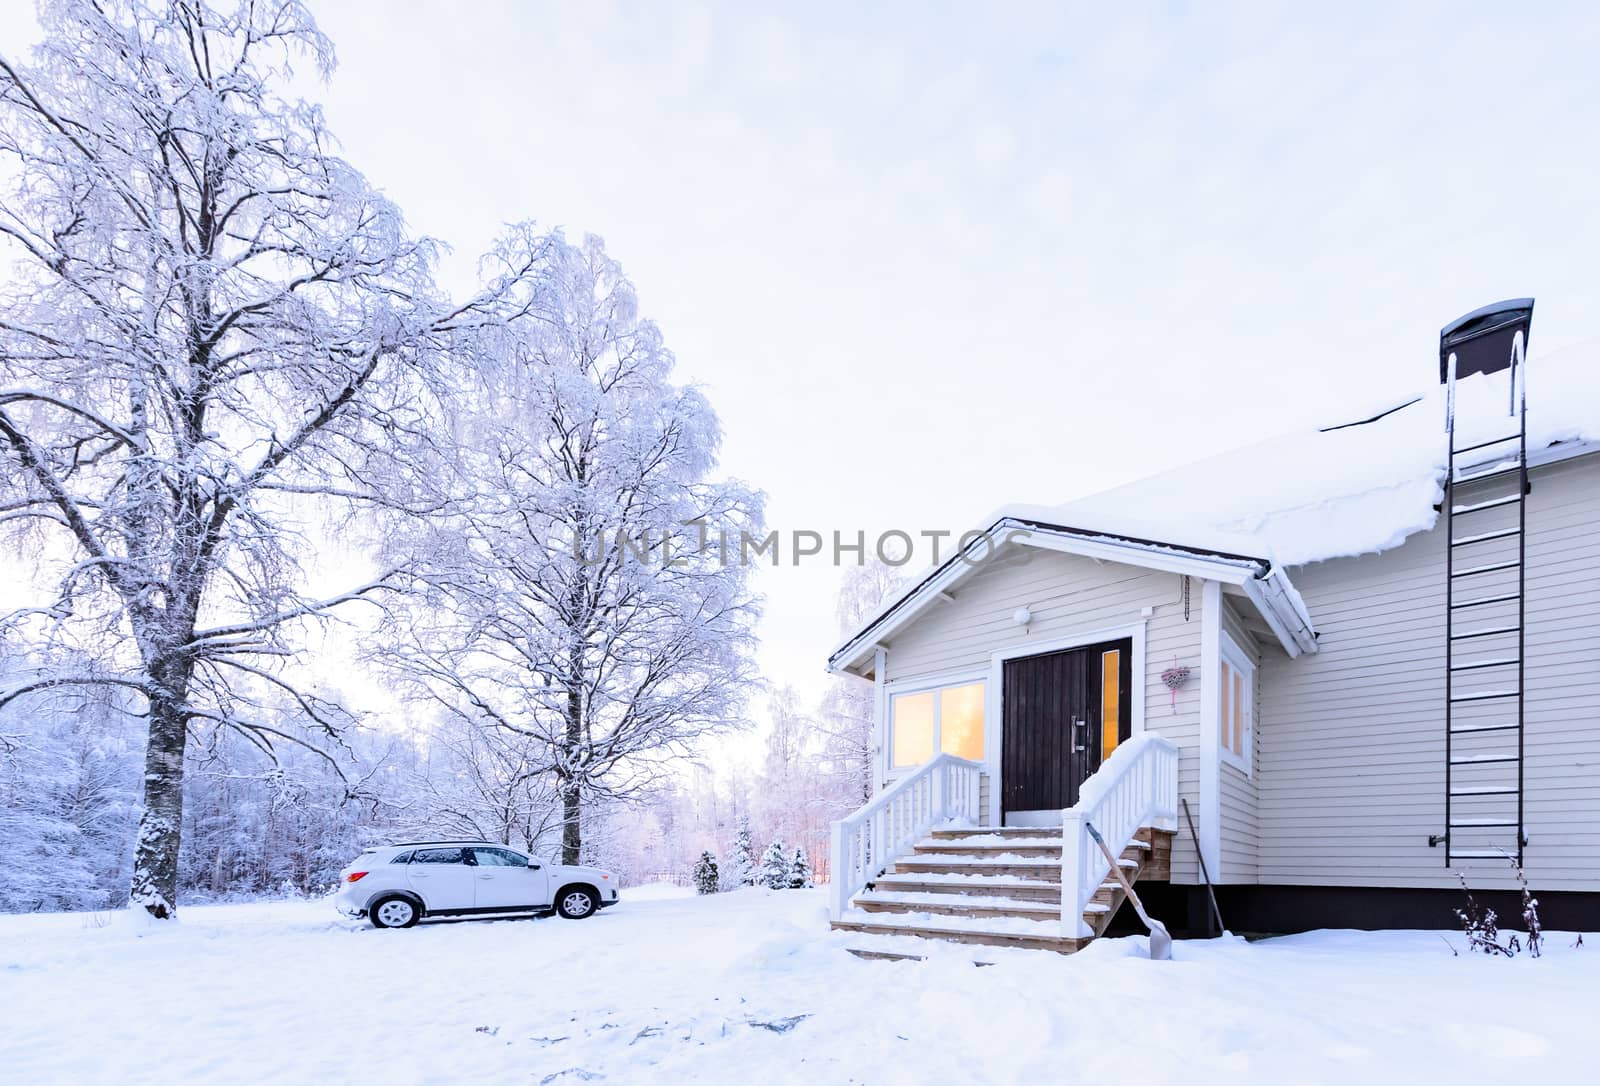 The house in the forest has covered with heavy snow in winter season at Lapland, Finland.